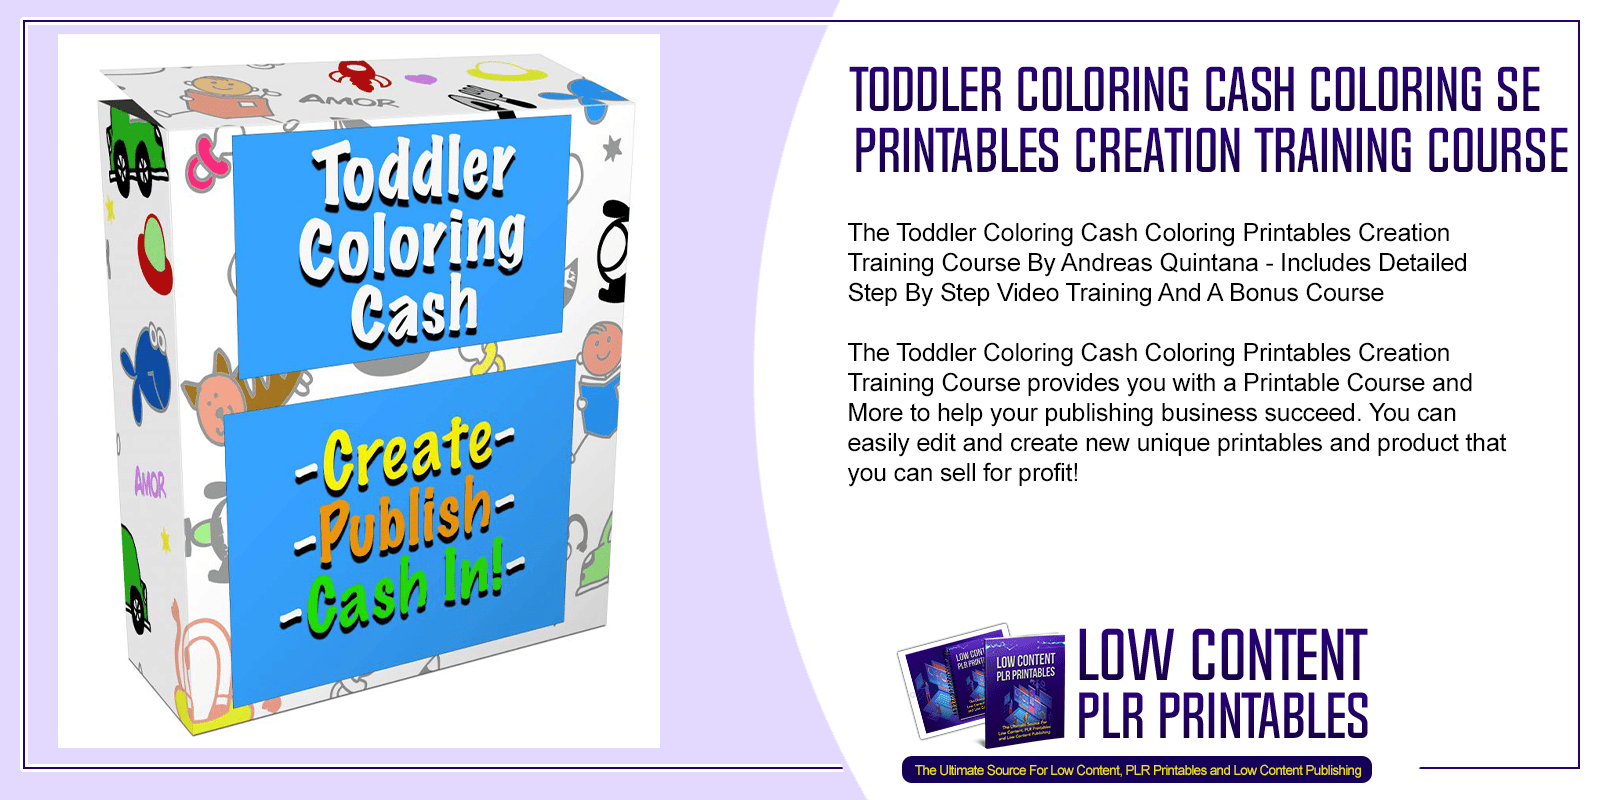 Toddler Coloring Cash Coloring Printables Creation Training Course